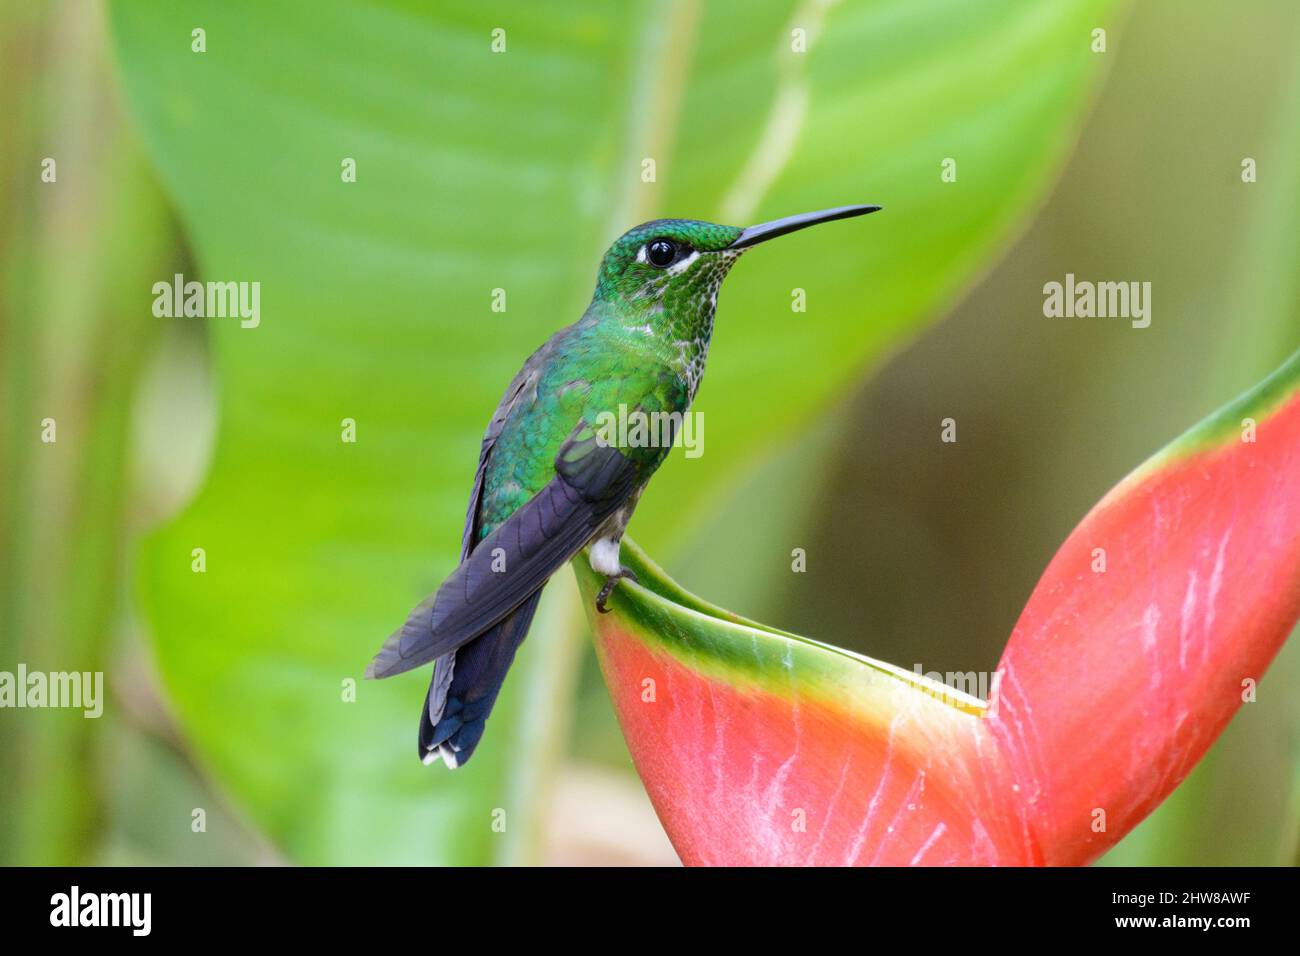 Green-crowned brilliant hummingbird (Heliodoxa jacula), also known as the green-fronted brilliant, Villa Blanca Cloud Forest, San Ramon, Costa Rica Stock Photo